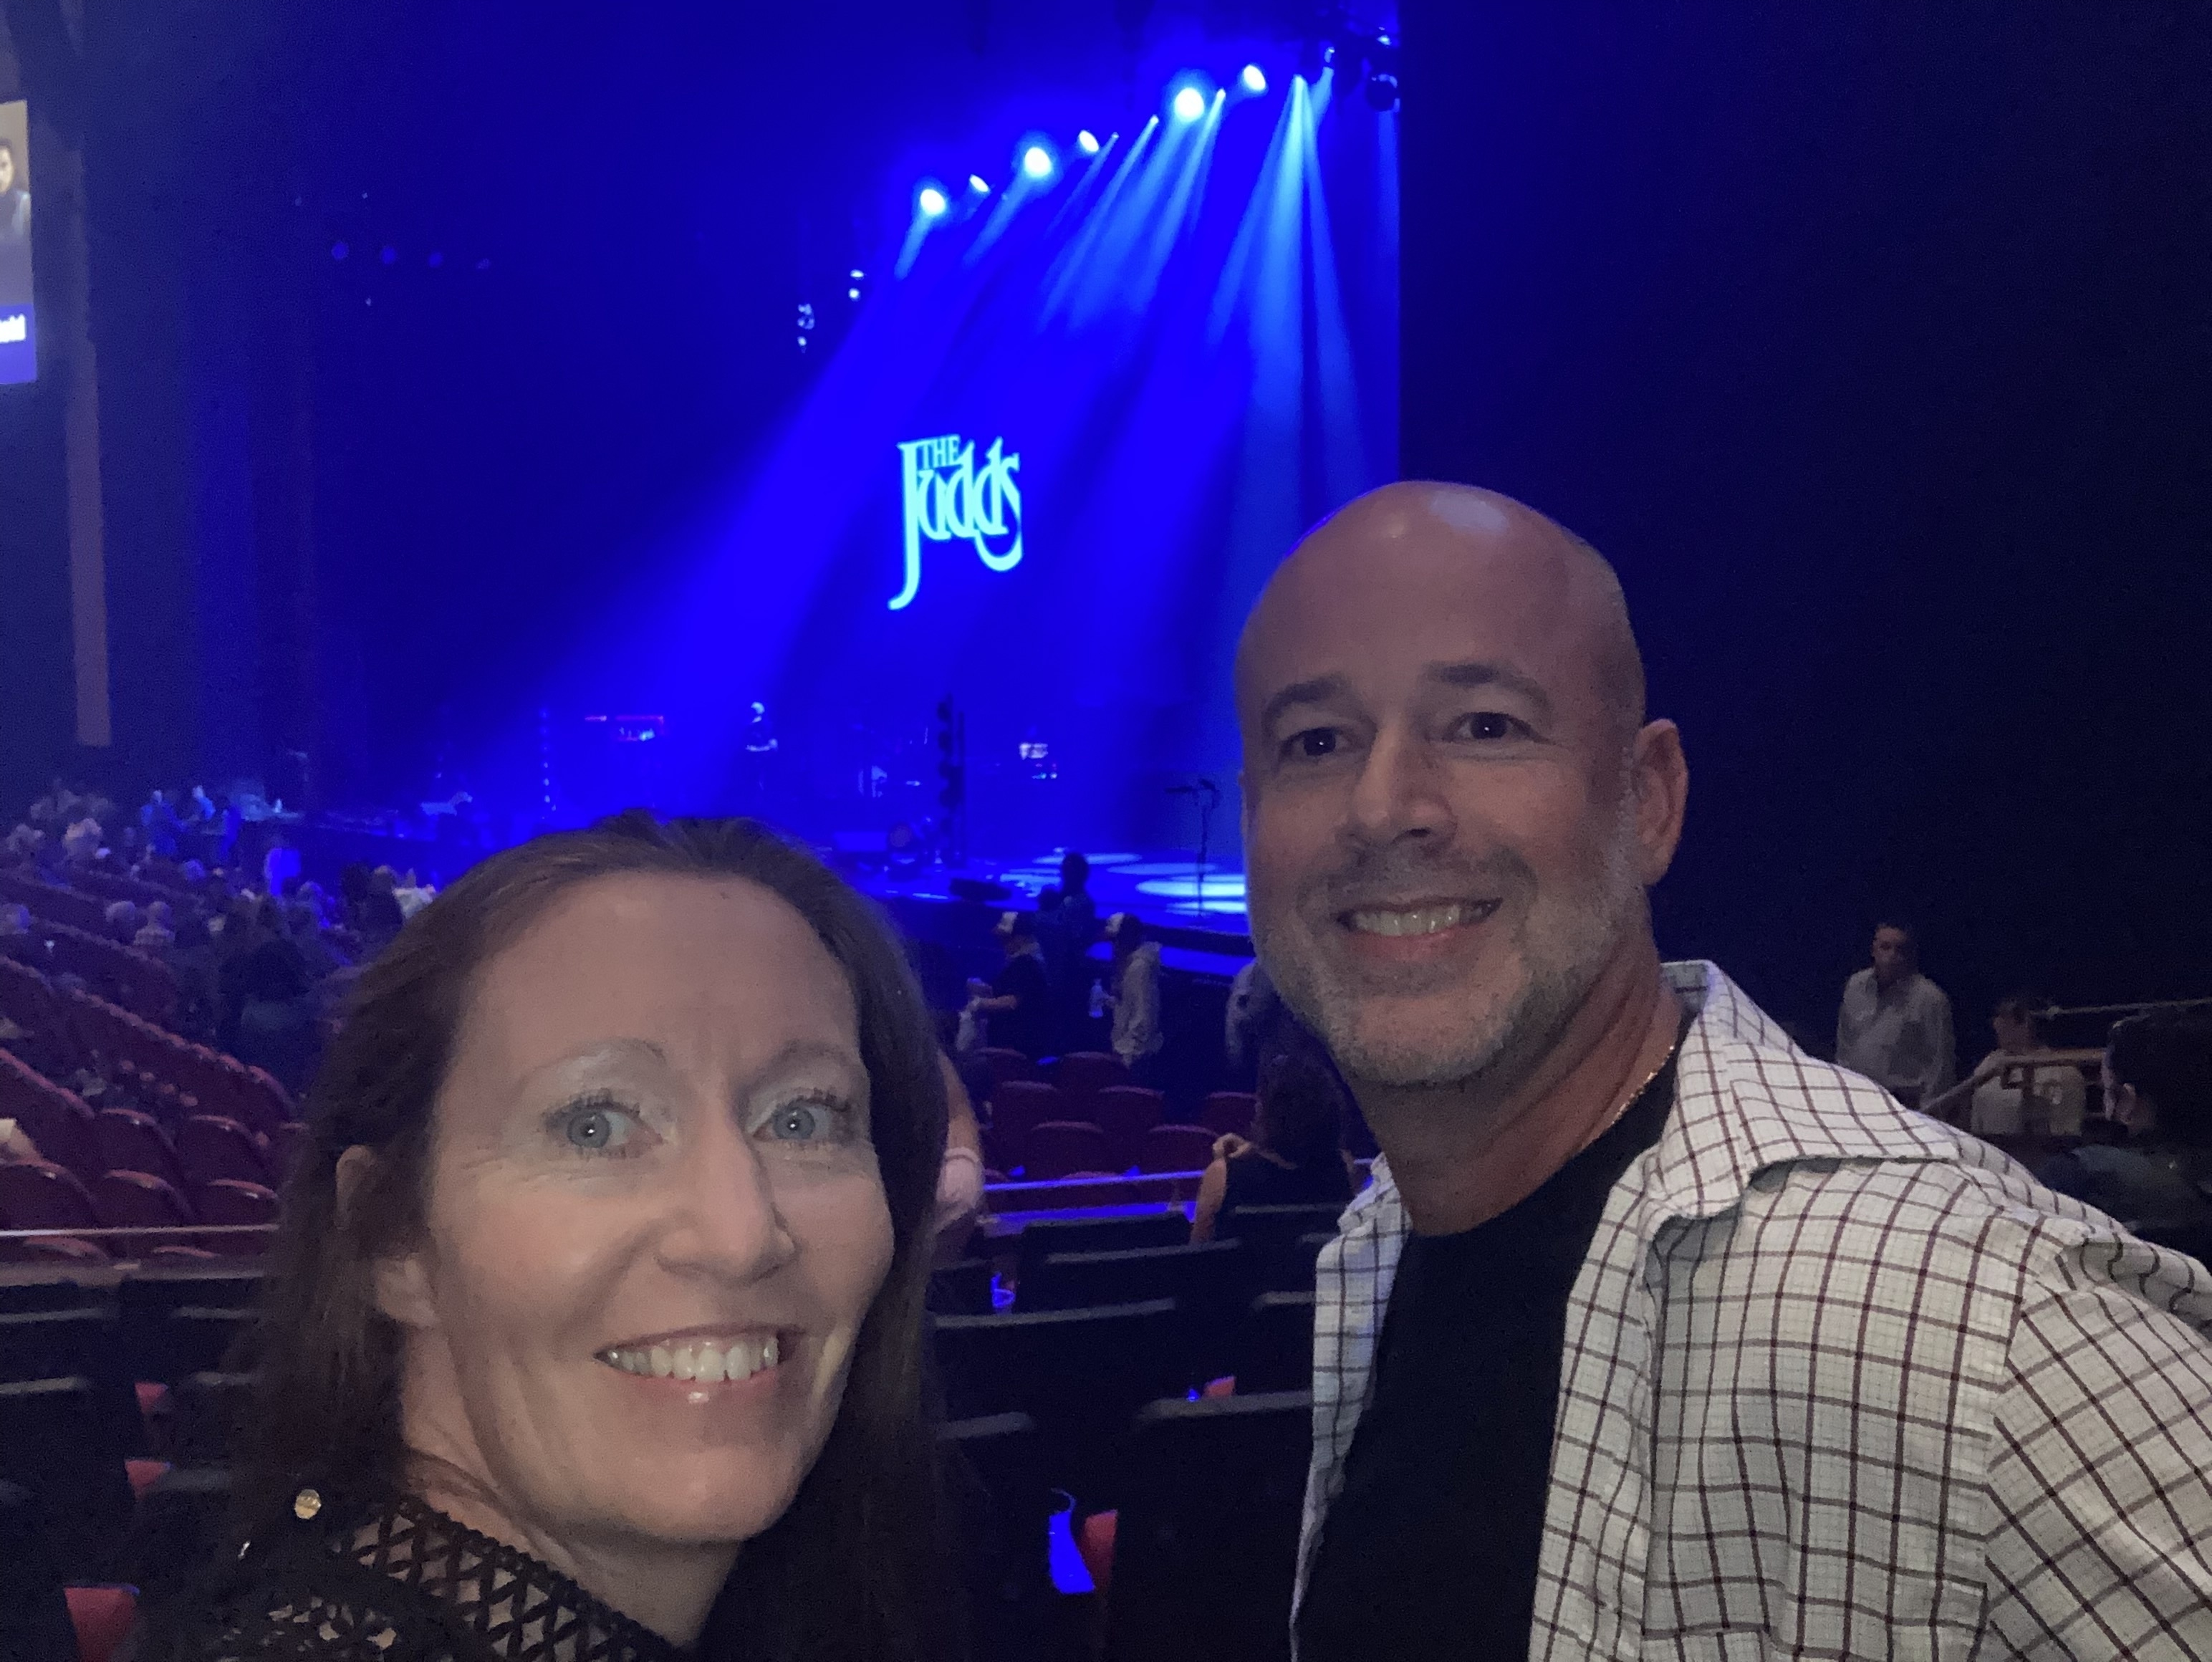 The Judds: the Final Tour